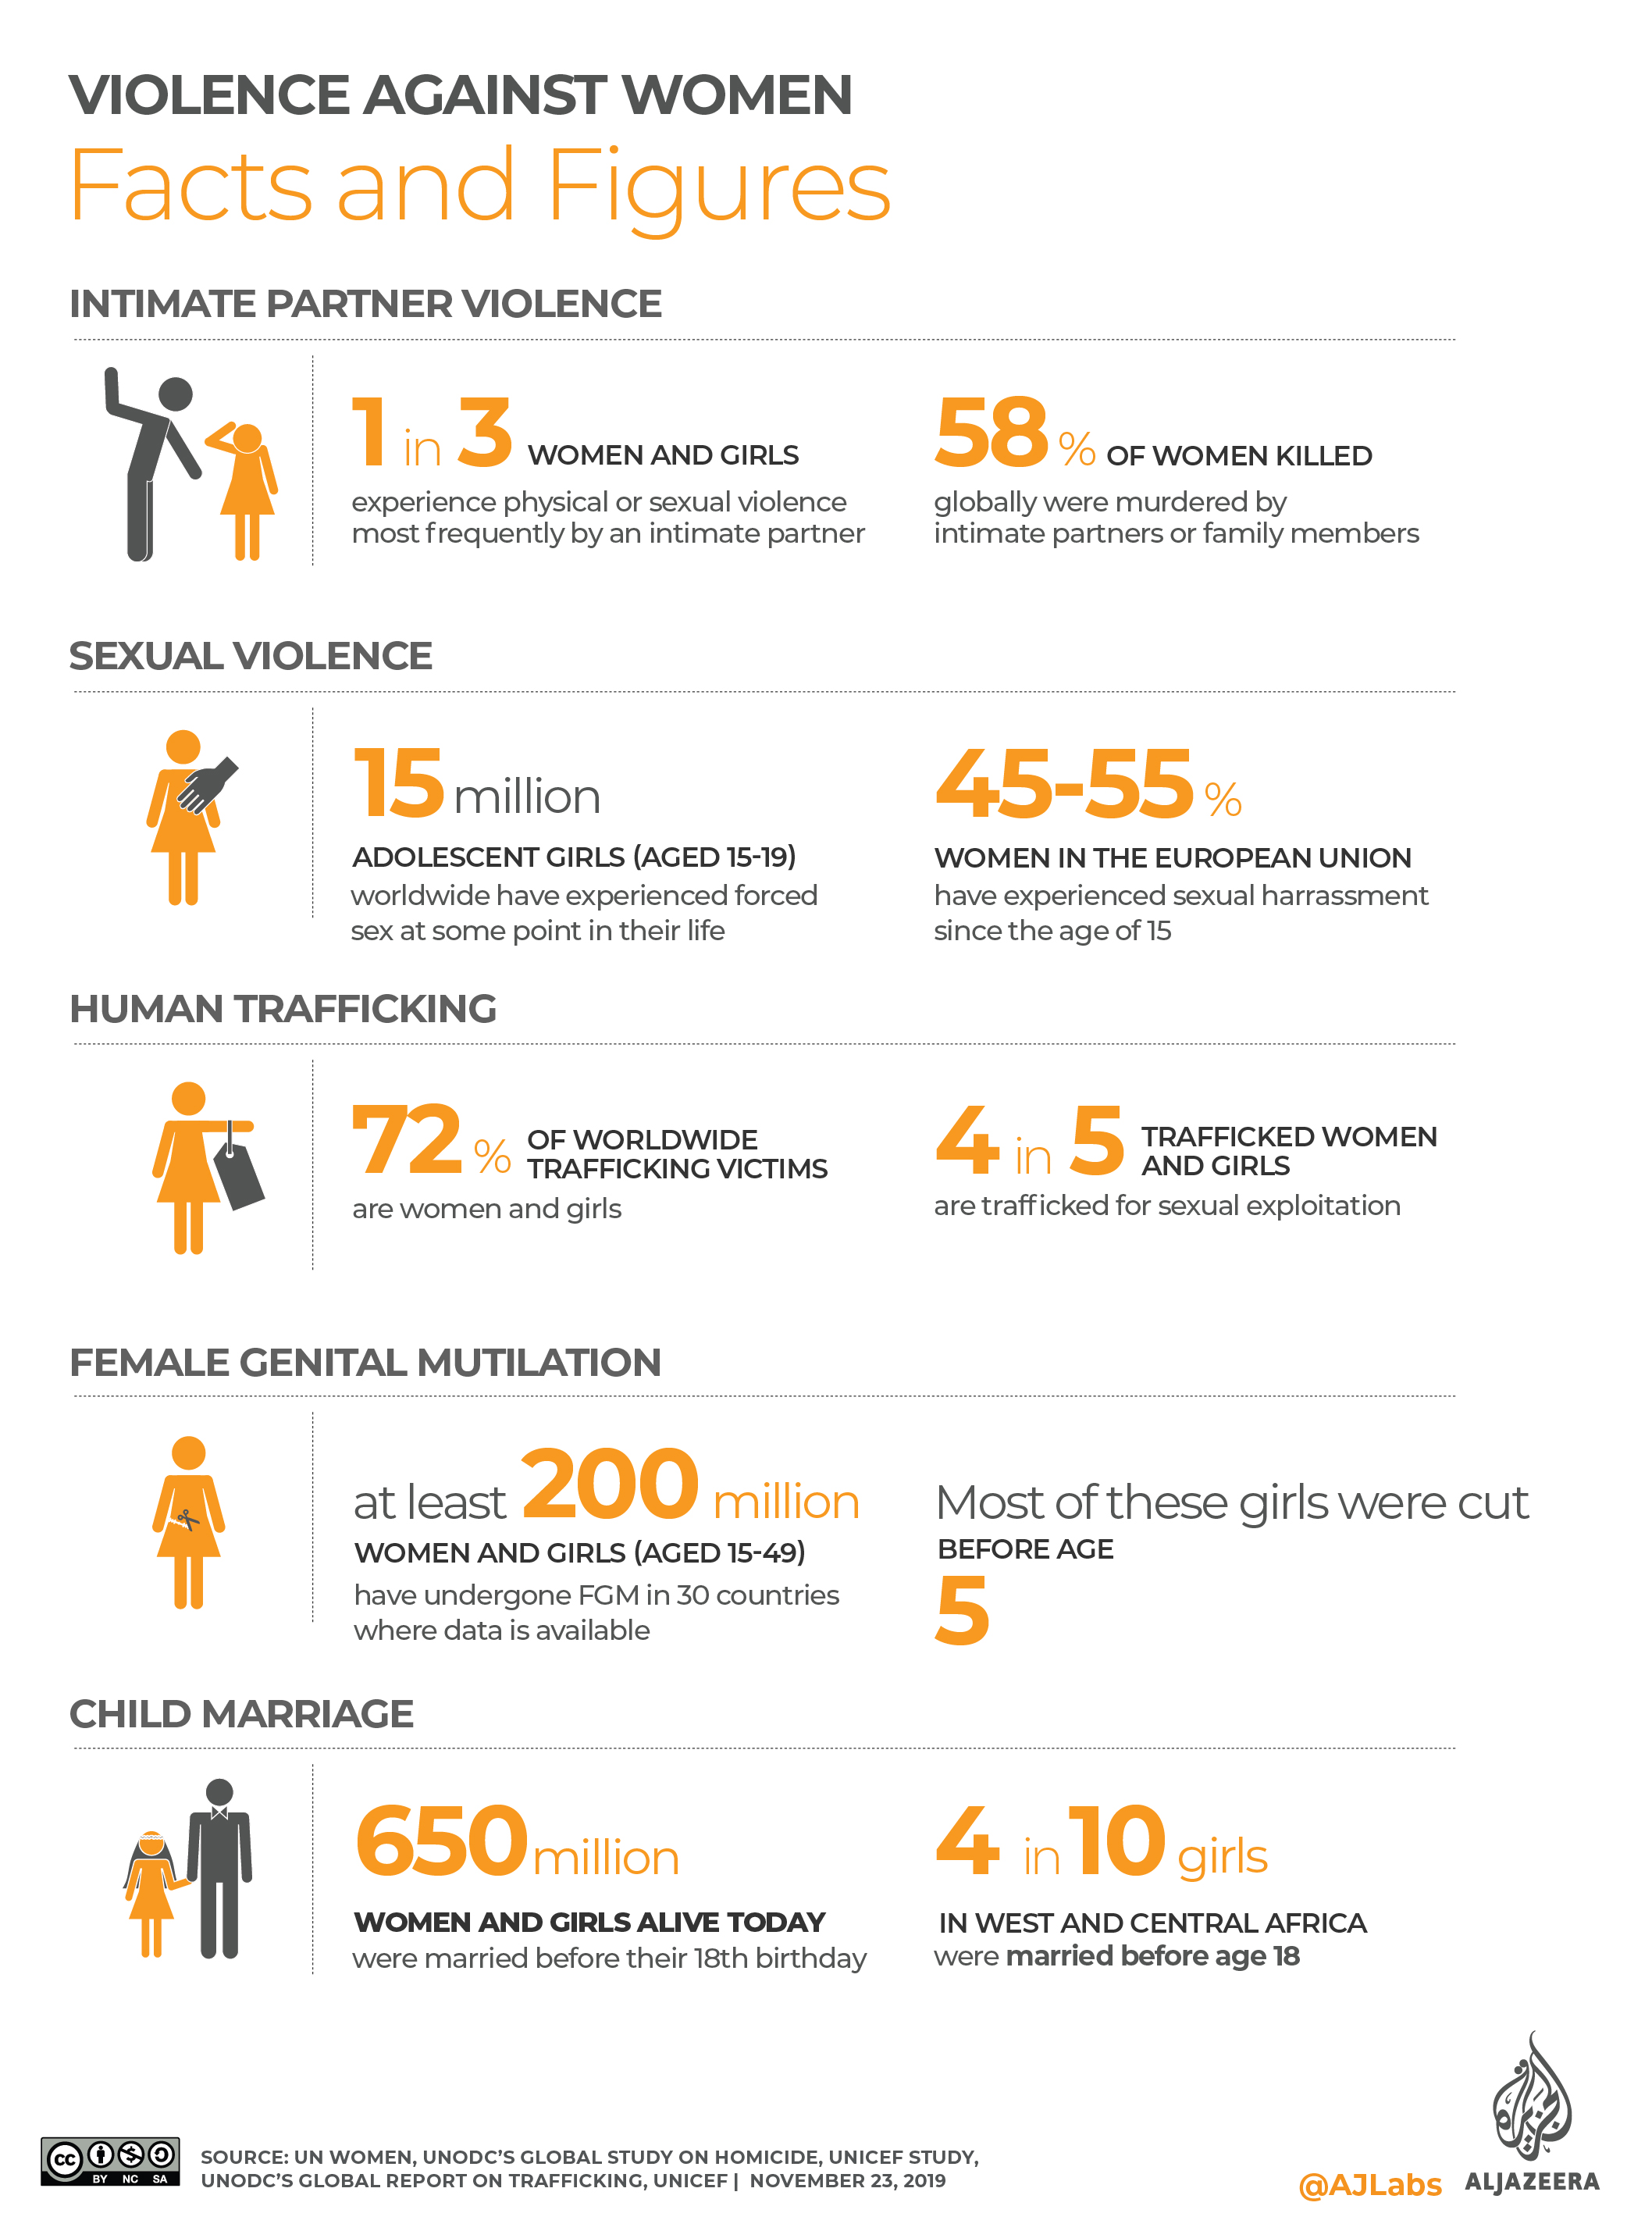 INTERACTIVE: France violence against women graphic